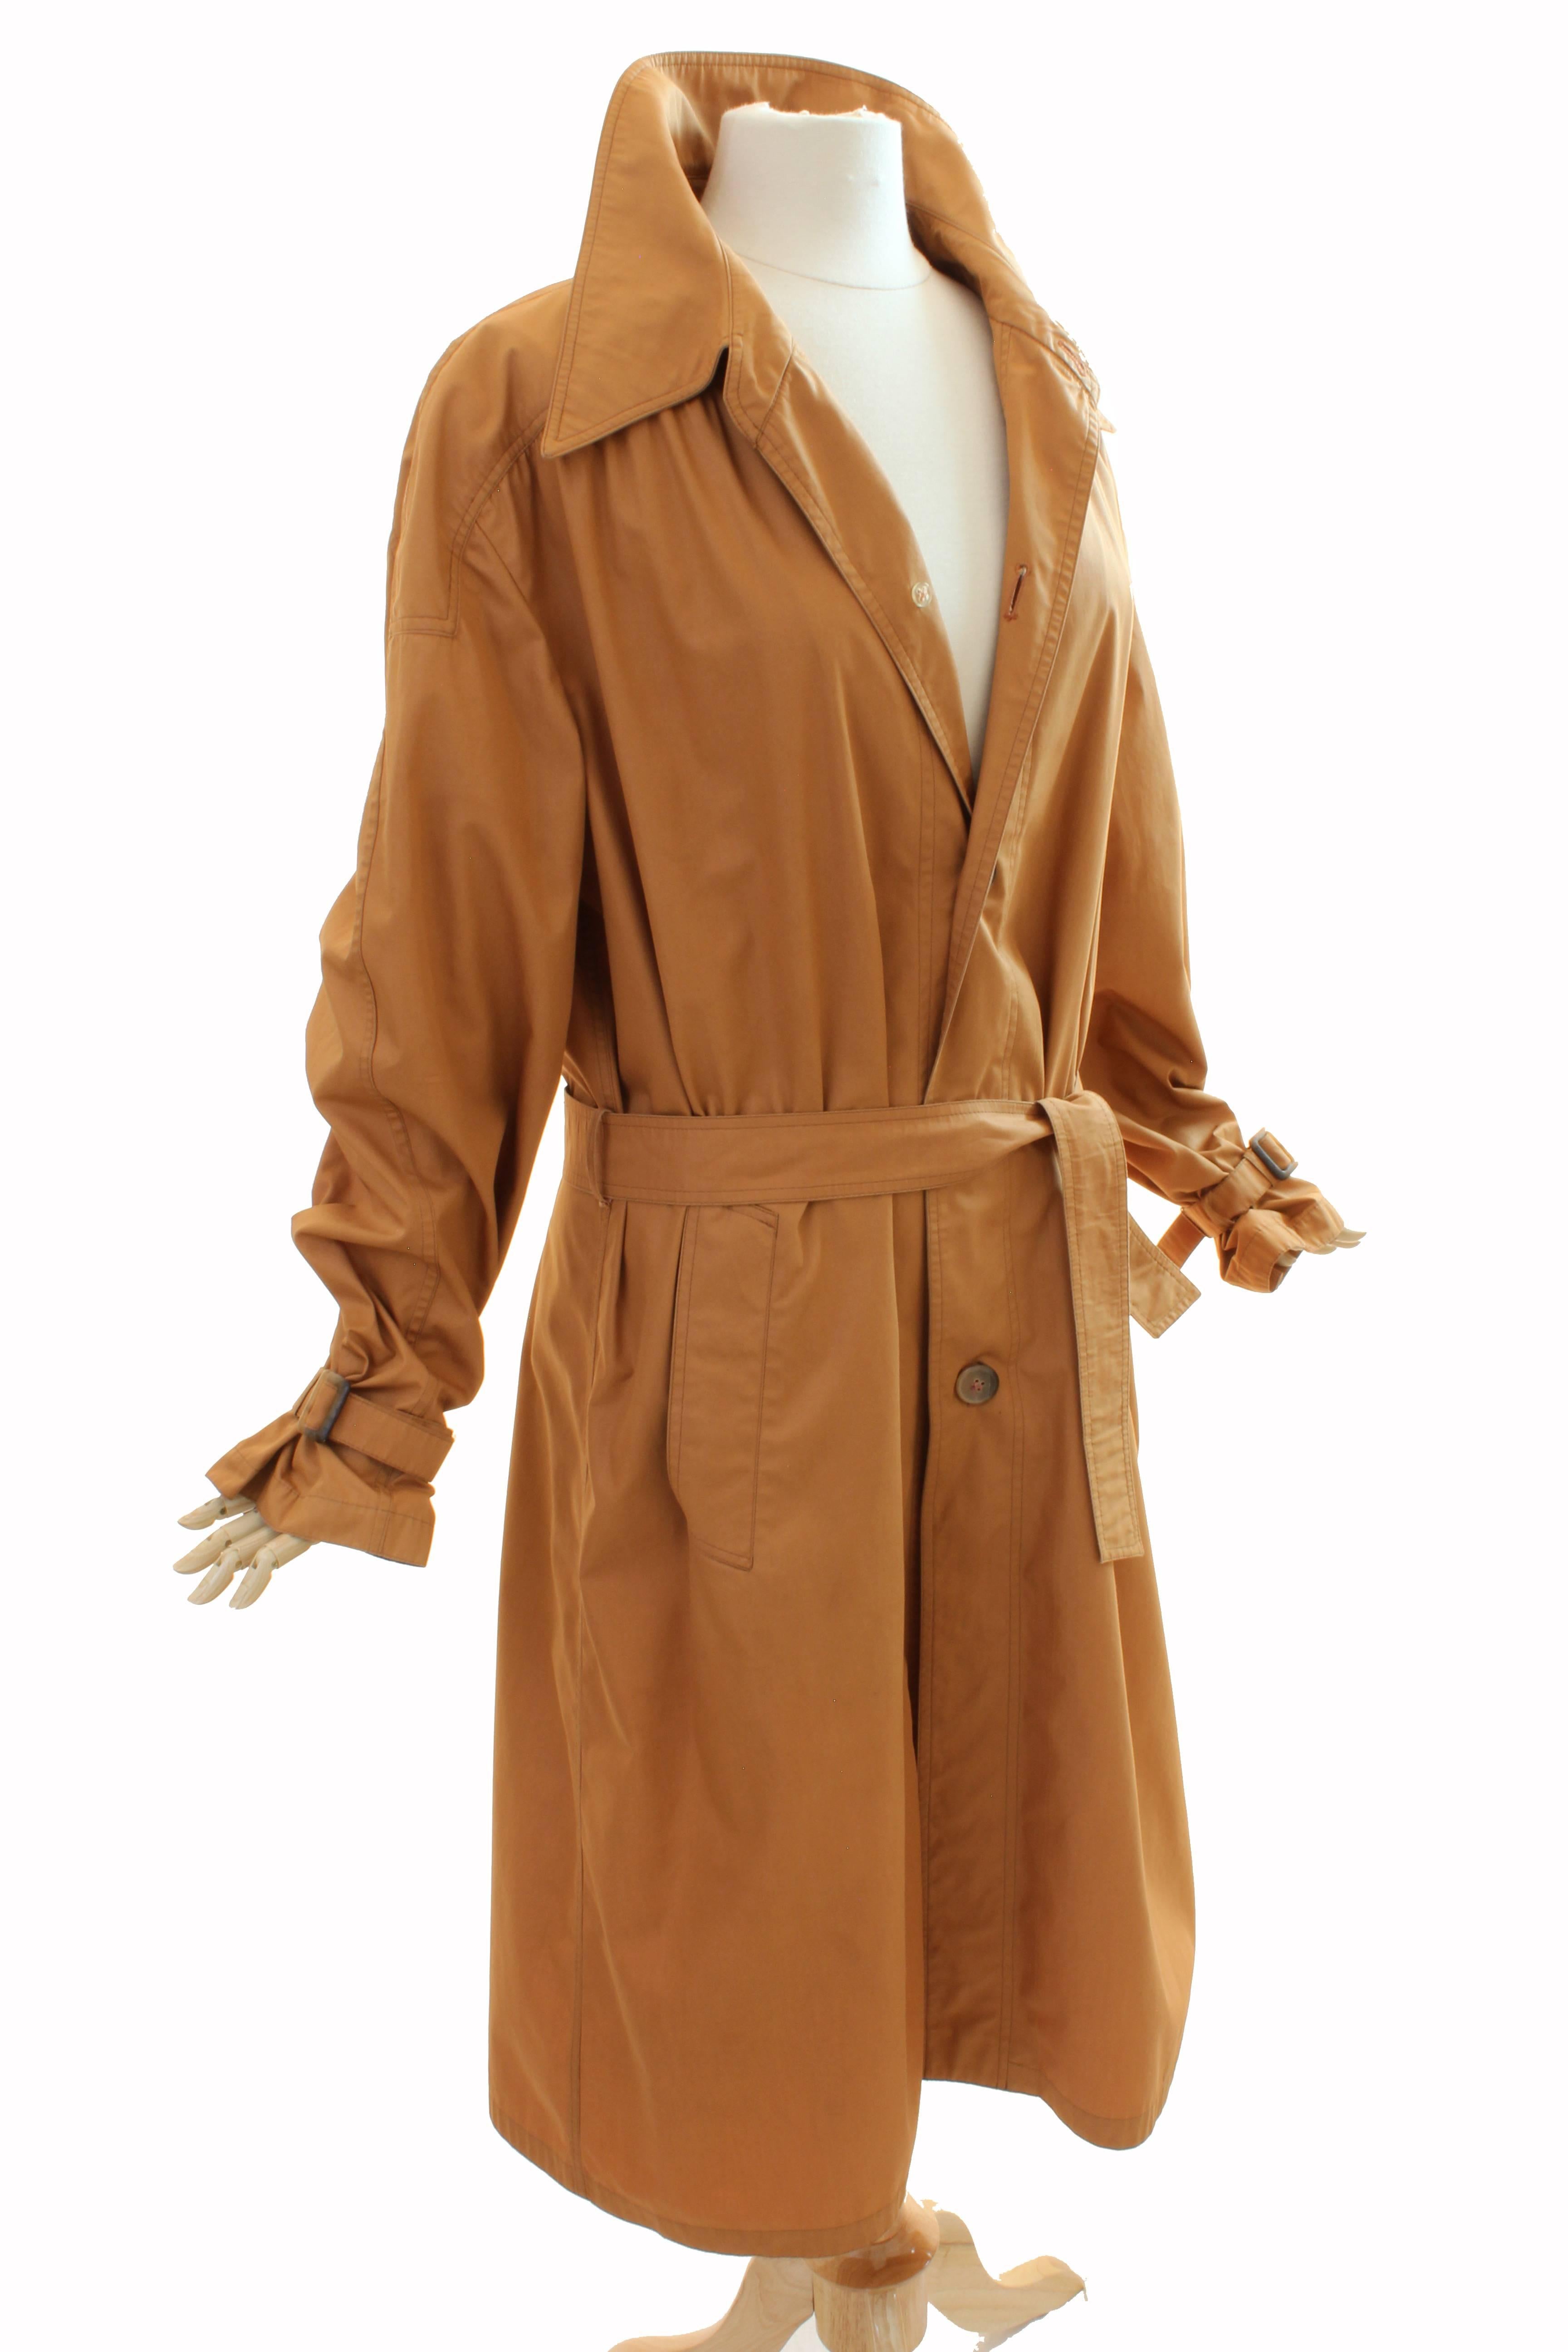 This chic trench was made by Liberty of London, most likely in the late 1950s.  Made from a cotton blend fabric in a deep shade of camel tan, it features side pockets, cinch buckles at the sleeve ends and a wrap-tie belt.  Unlined and lightweight,